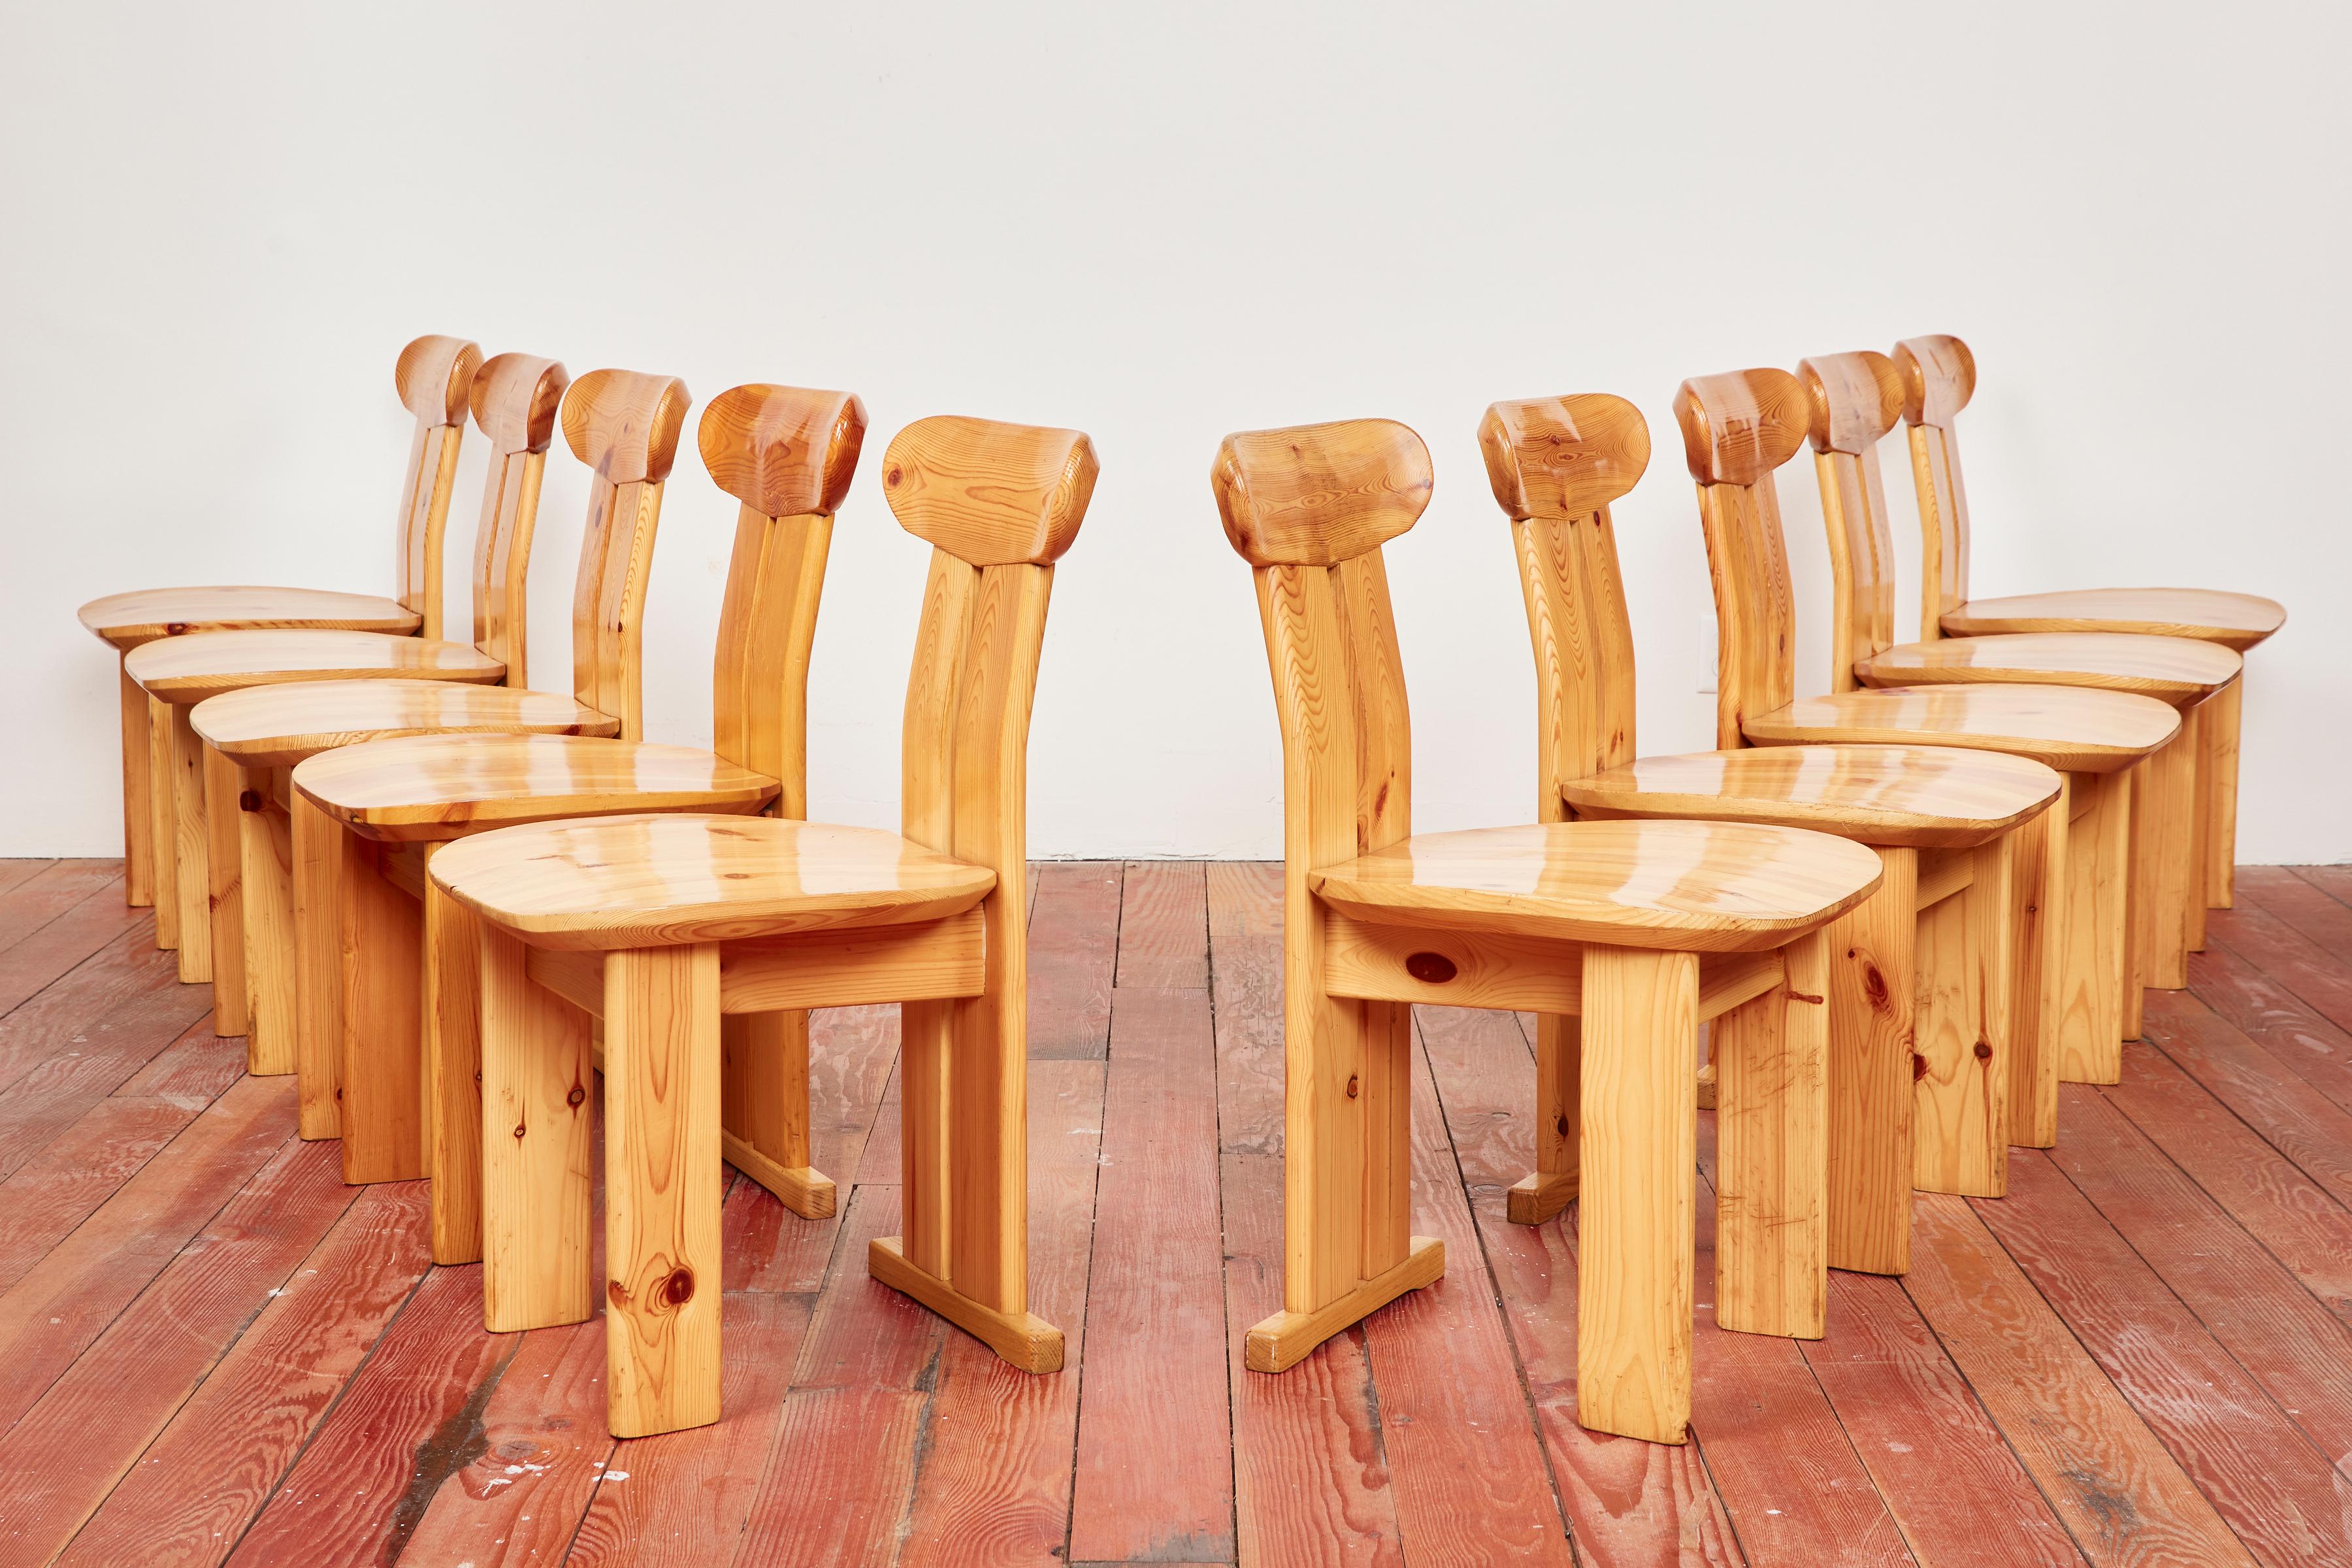 Wonderful set of solid wood dining chairs with great shape and craftsmanship
Constructed out of pine in the style of Pierre Chapo
France, circa 1950s.